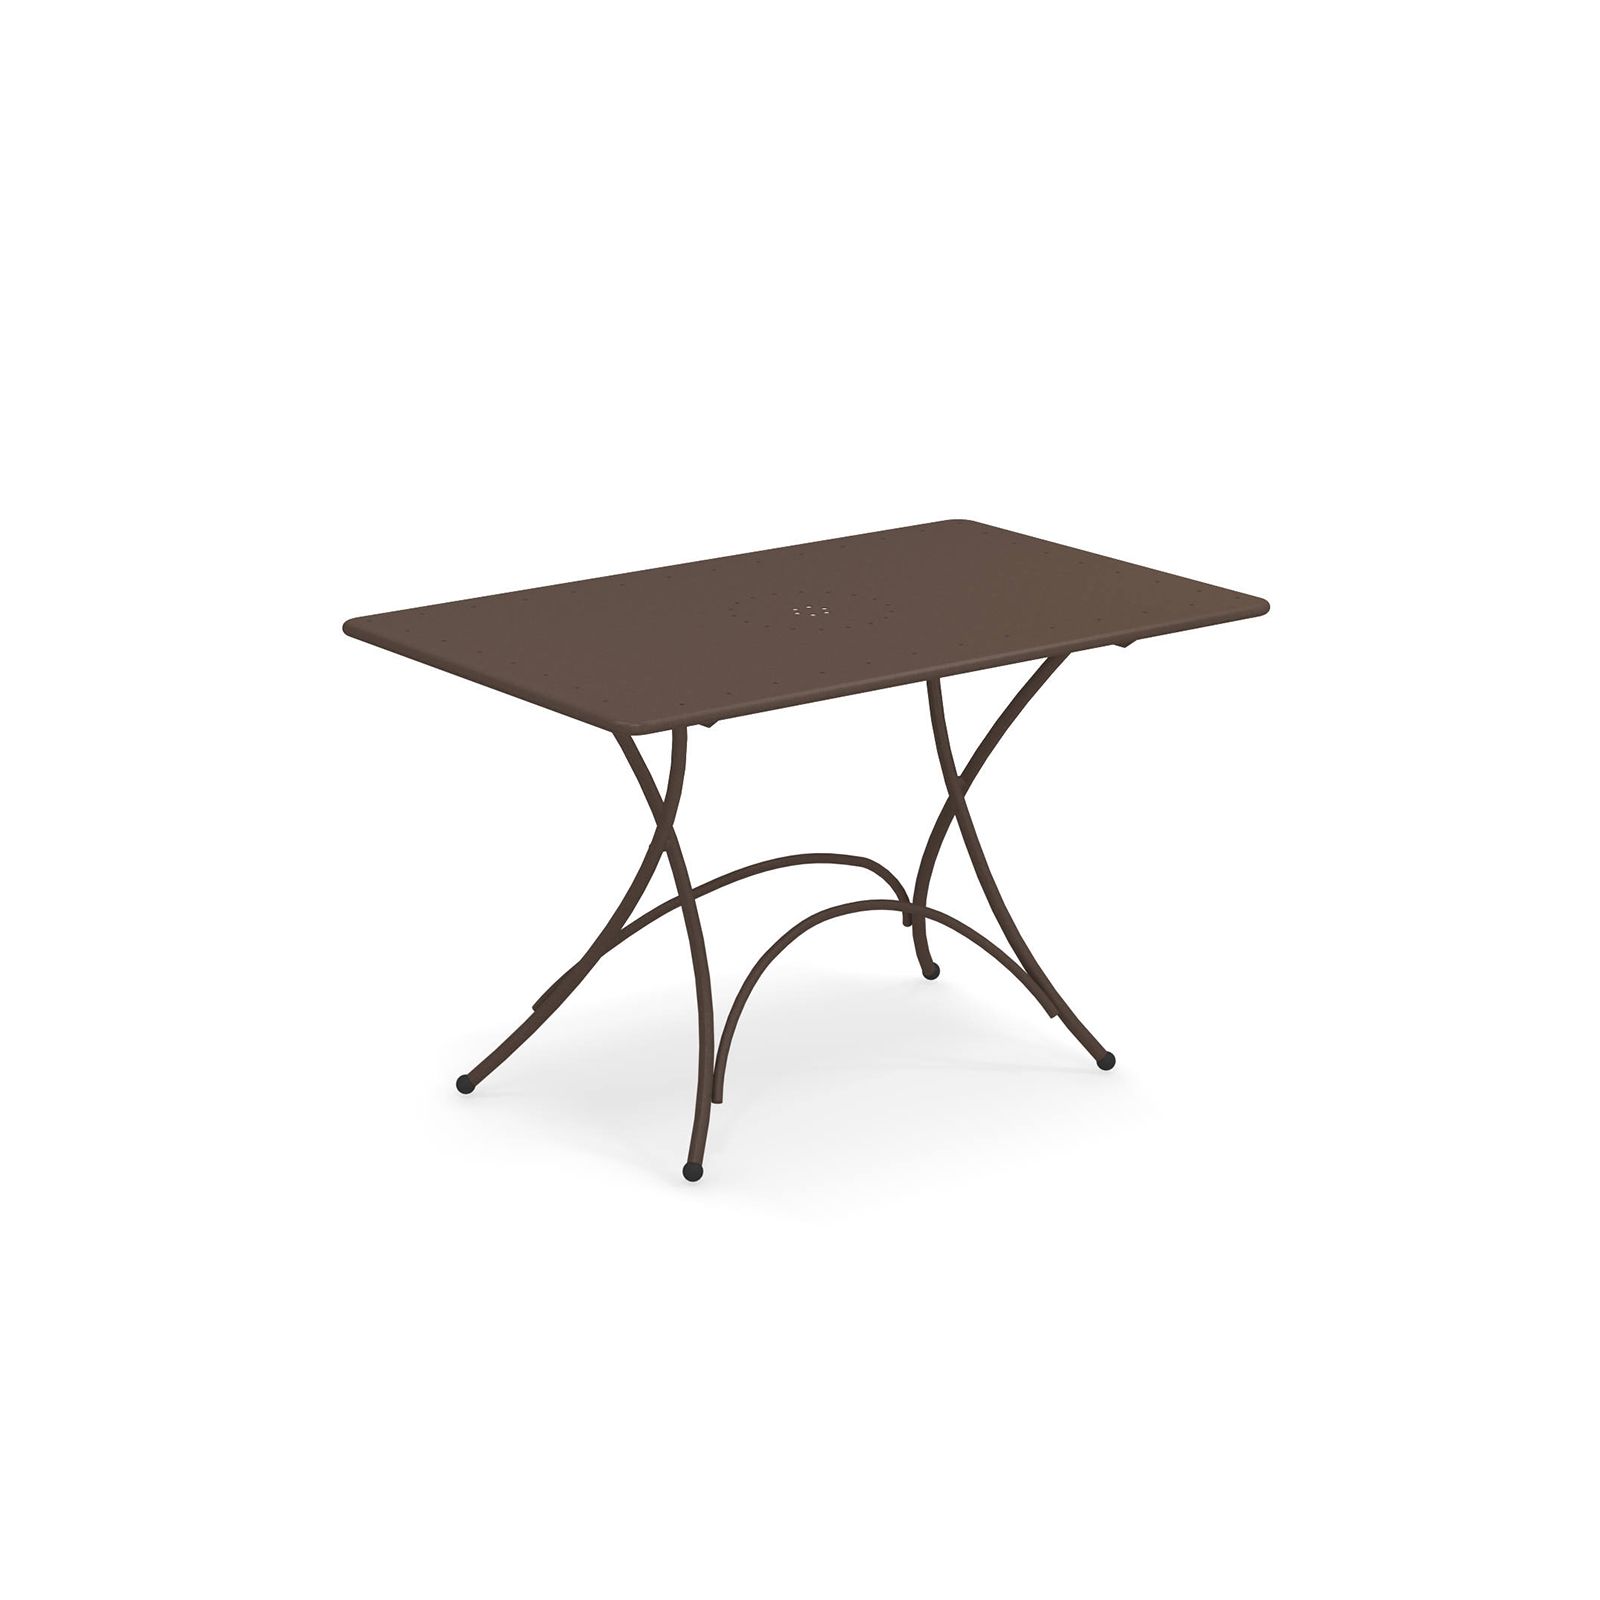 PIGALLE TABLE